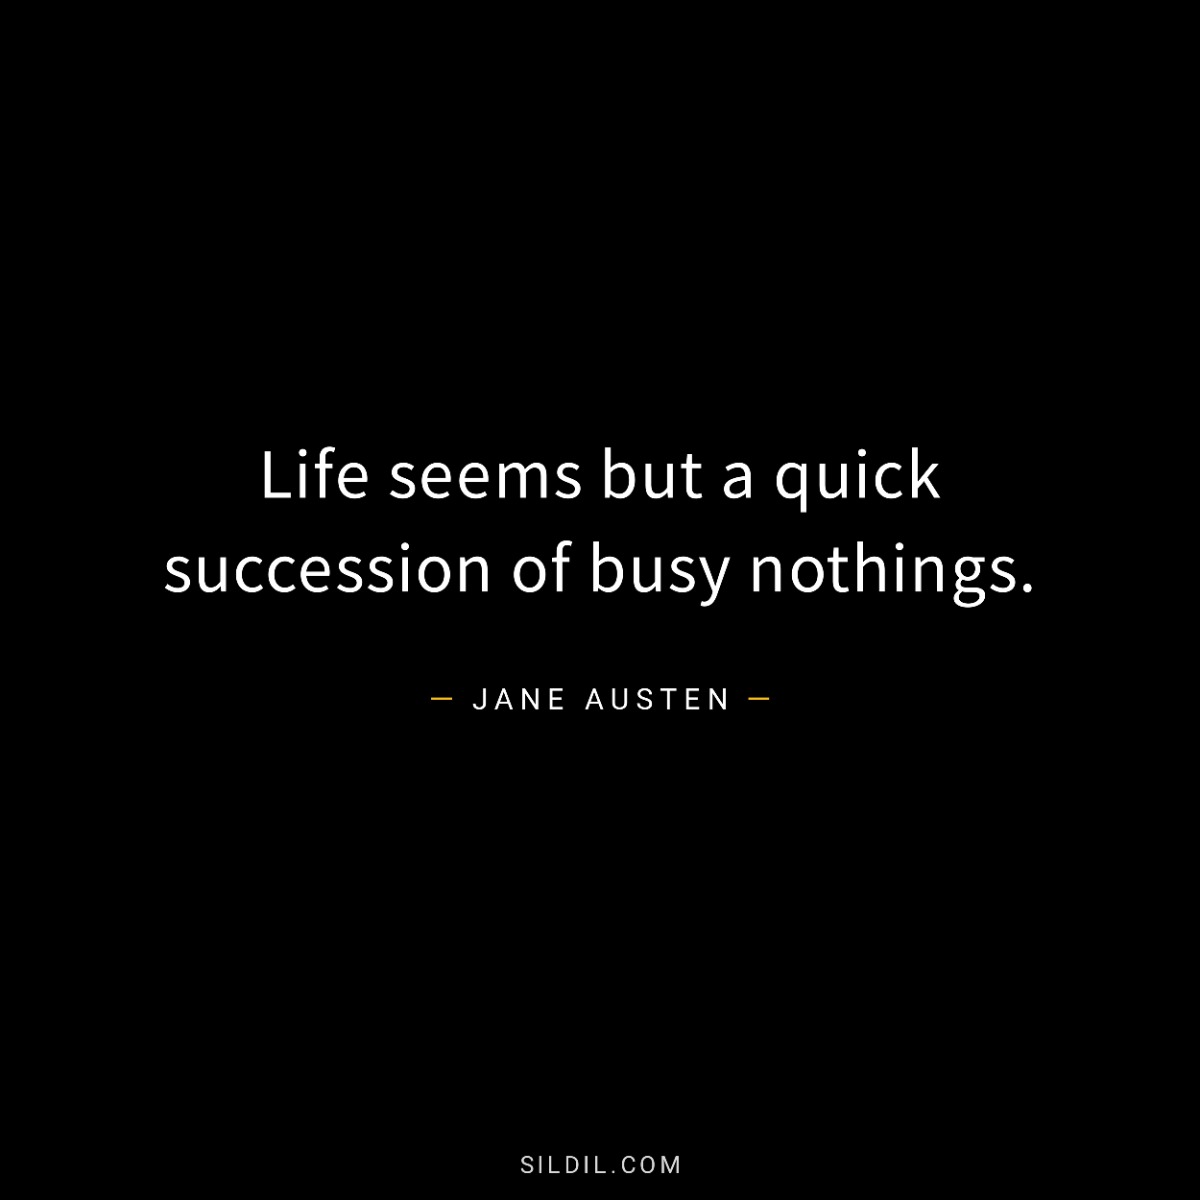 Life seems but a quick succession of busy nothings.